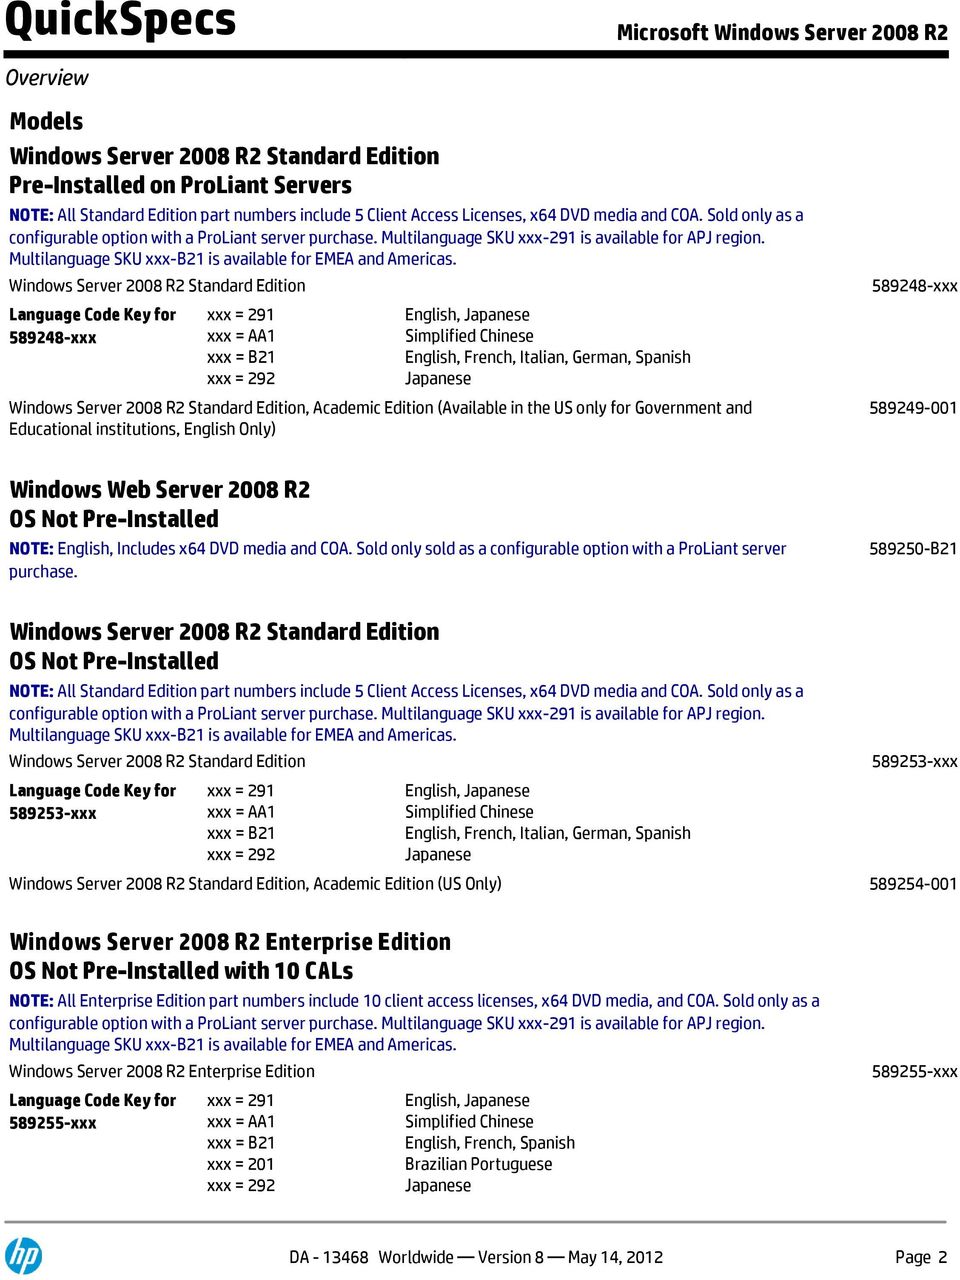 Windows Server 2008 R2 Standard Edition 589248-xxx,,, Italian,, Windows Server 2008 R2 Standard Edition, Academic Edition (Available in the US only for Government and Educational institutions, Only)